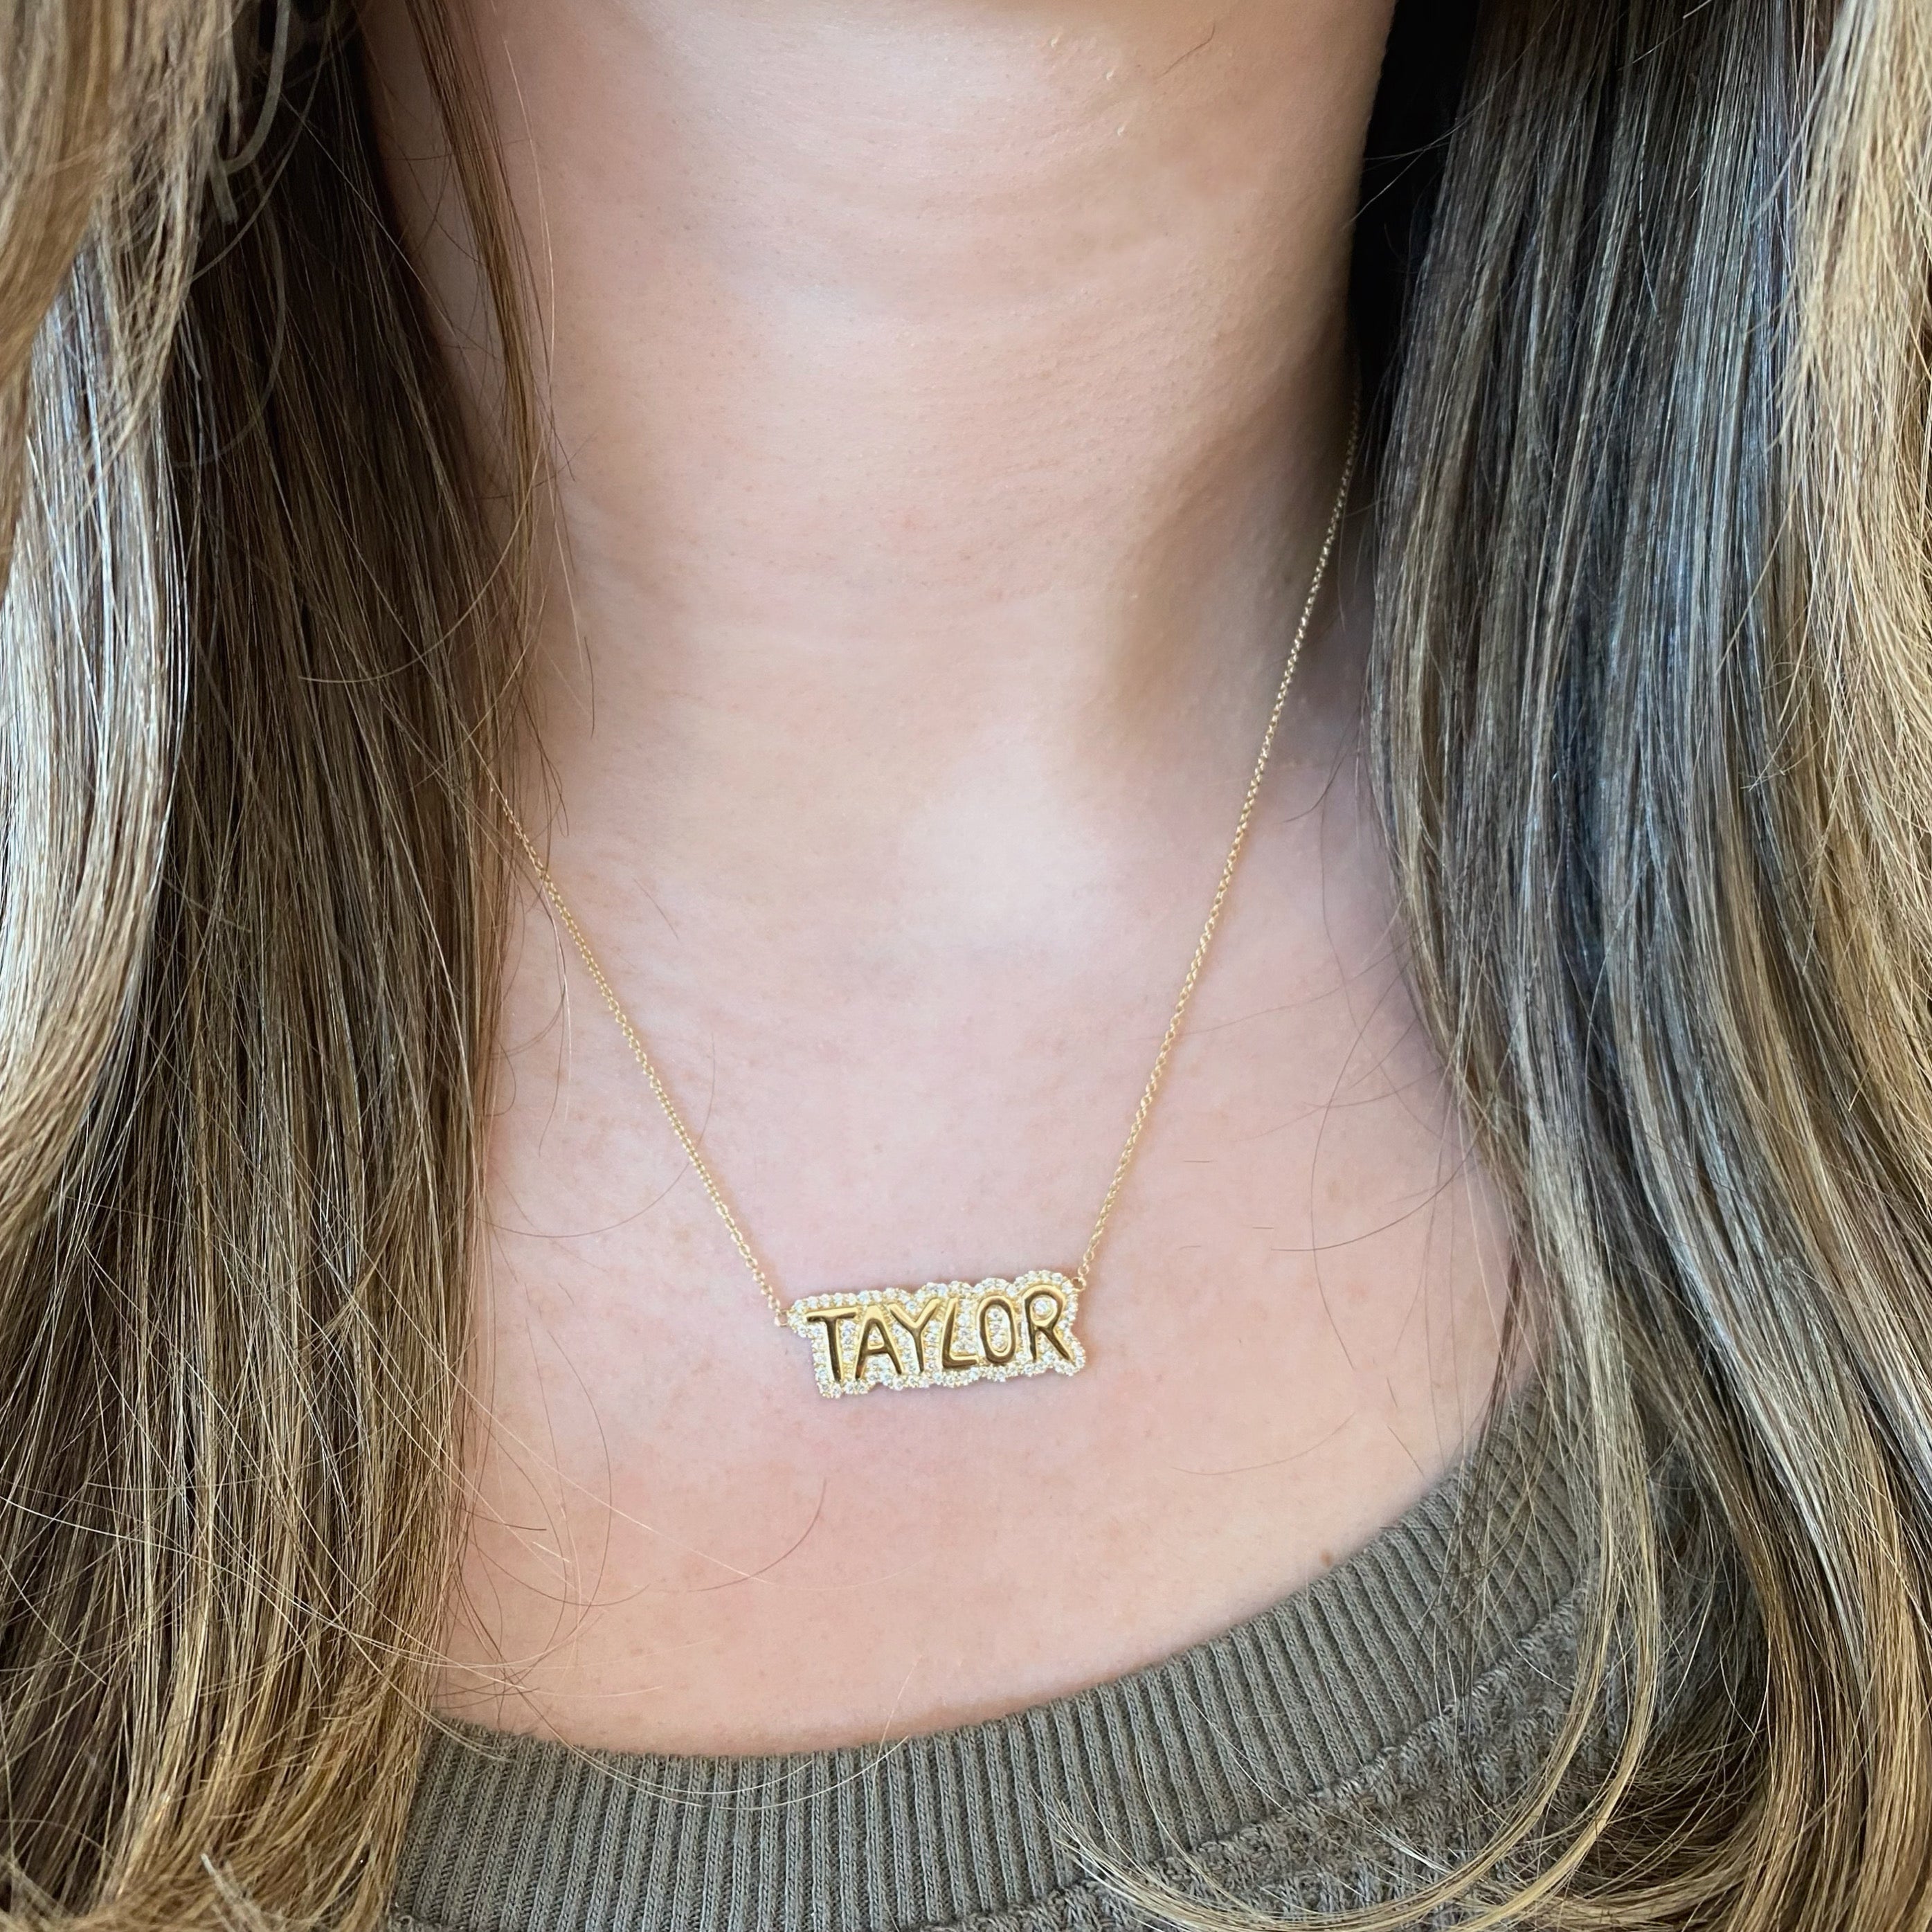 Cut Tone Nameplate Necklace - The M Jewelers